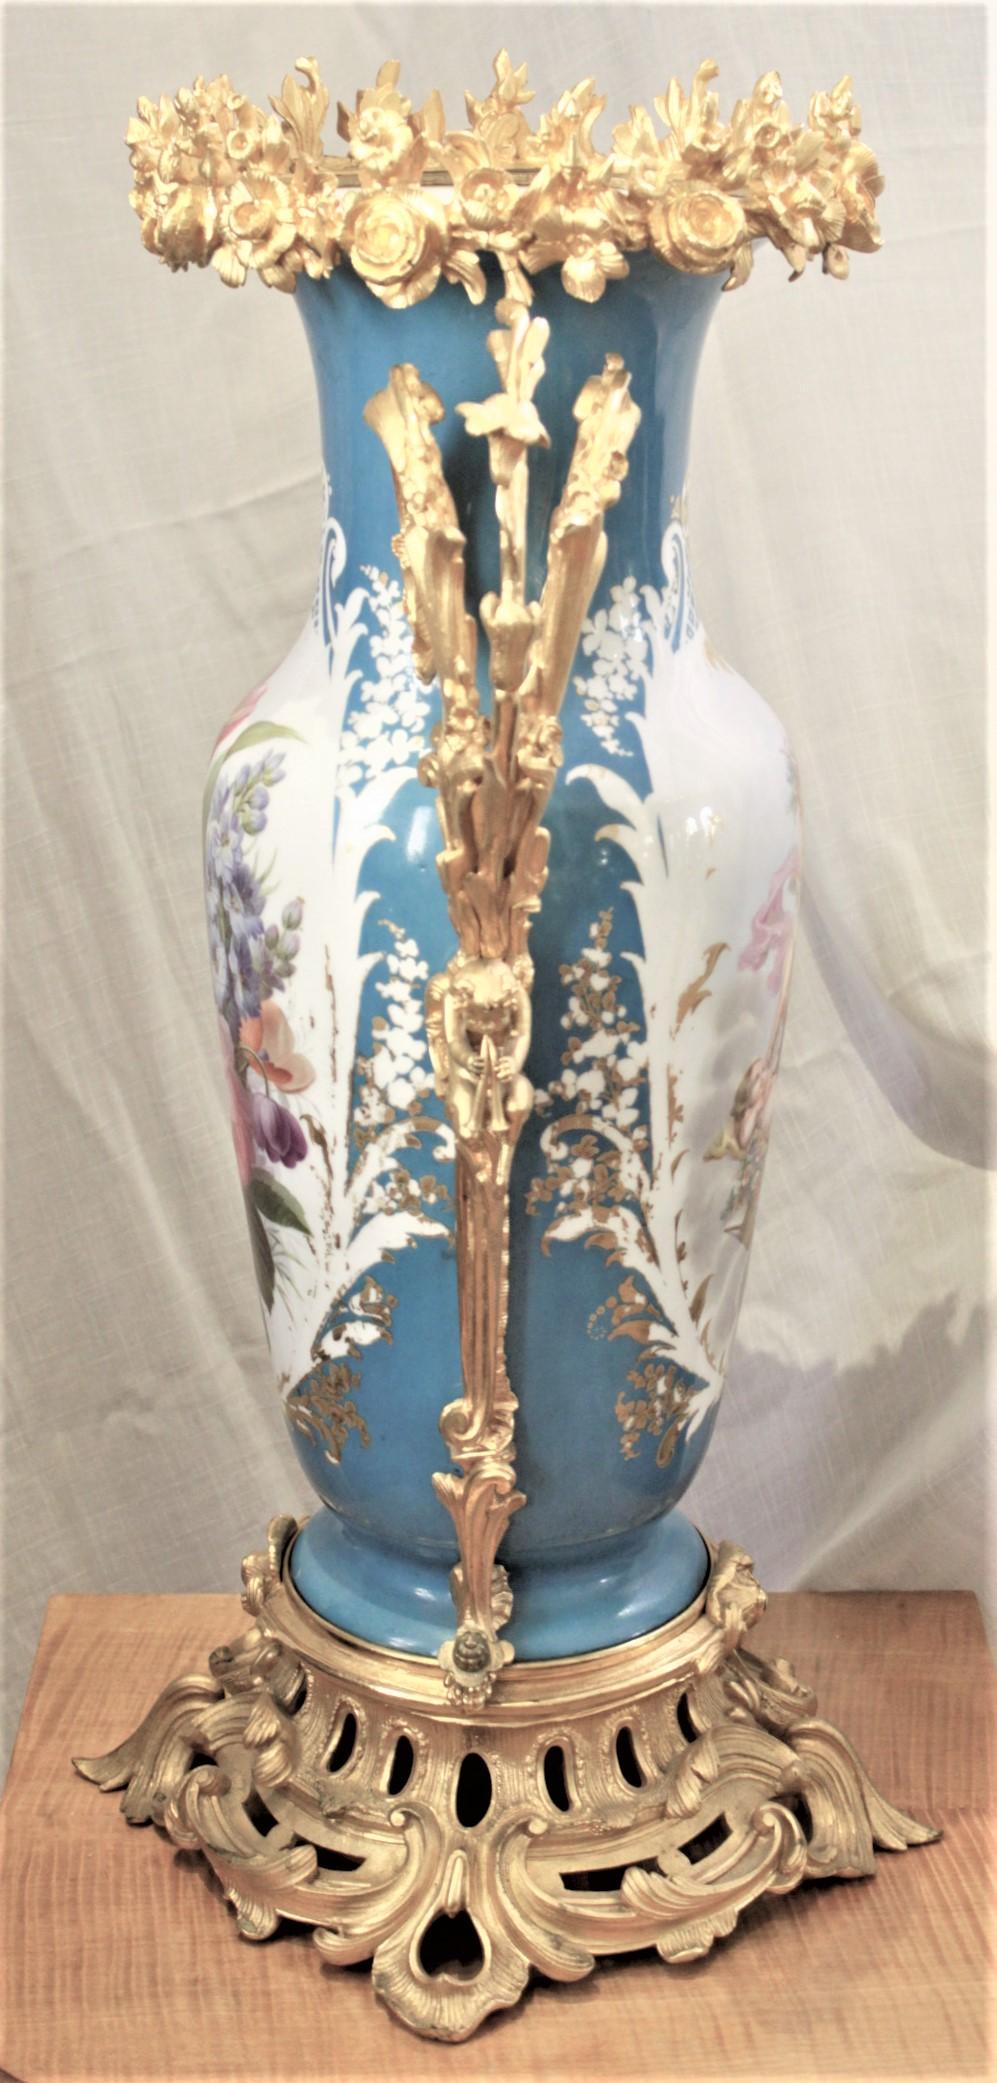 Large Antique Sevres Styled Hand-Painted Porcelain Vase with Gilt Bronze Mounts For Sale 1